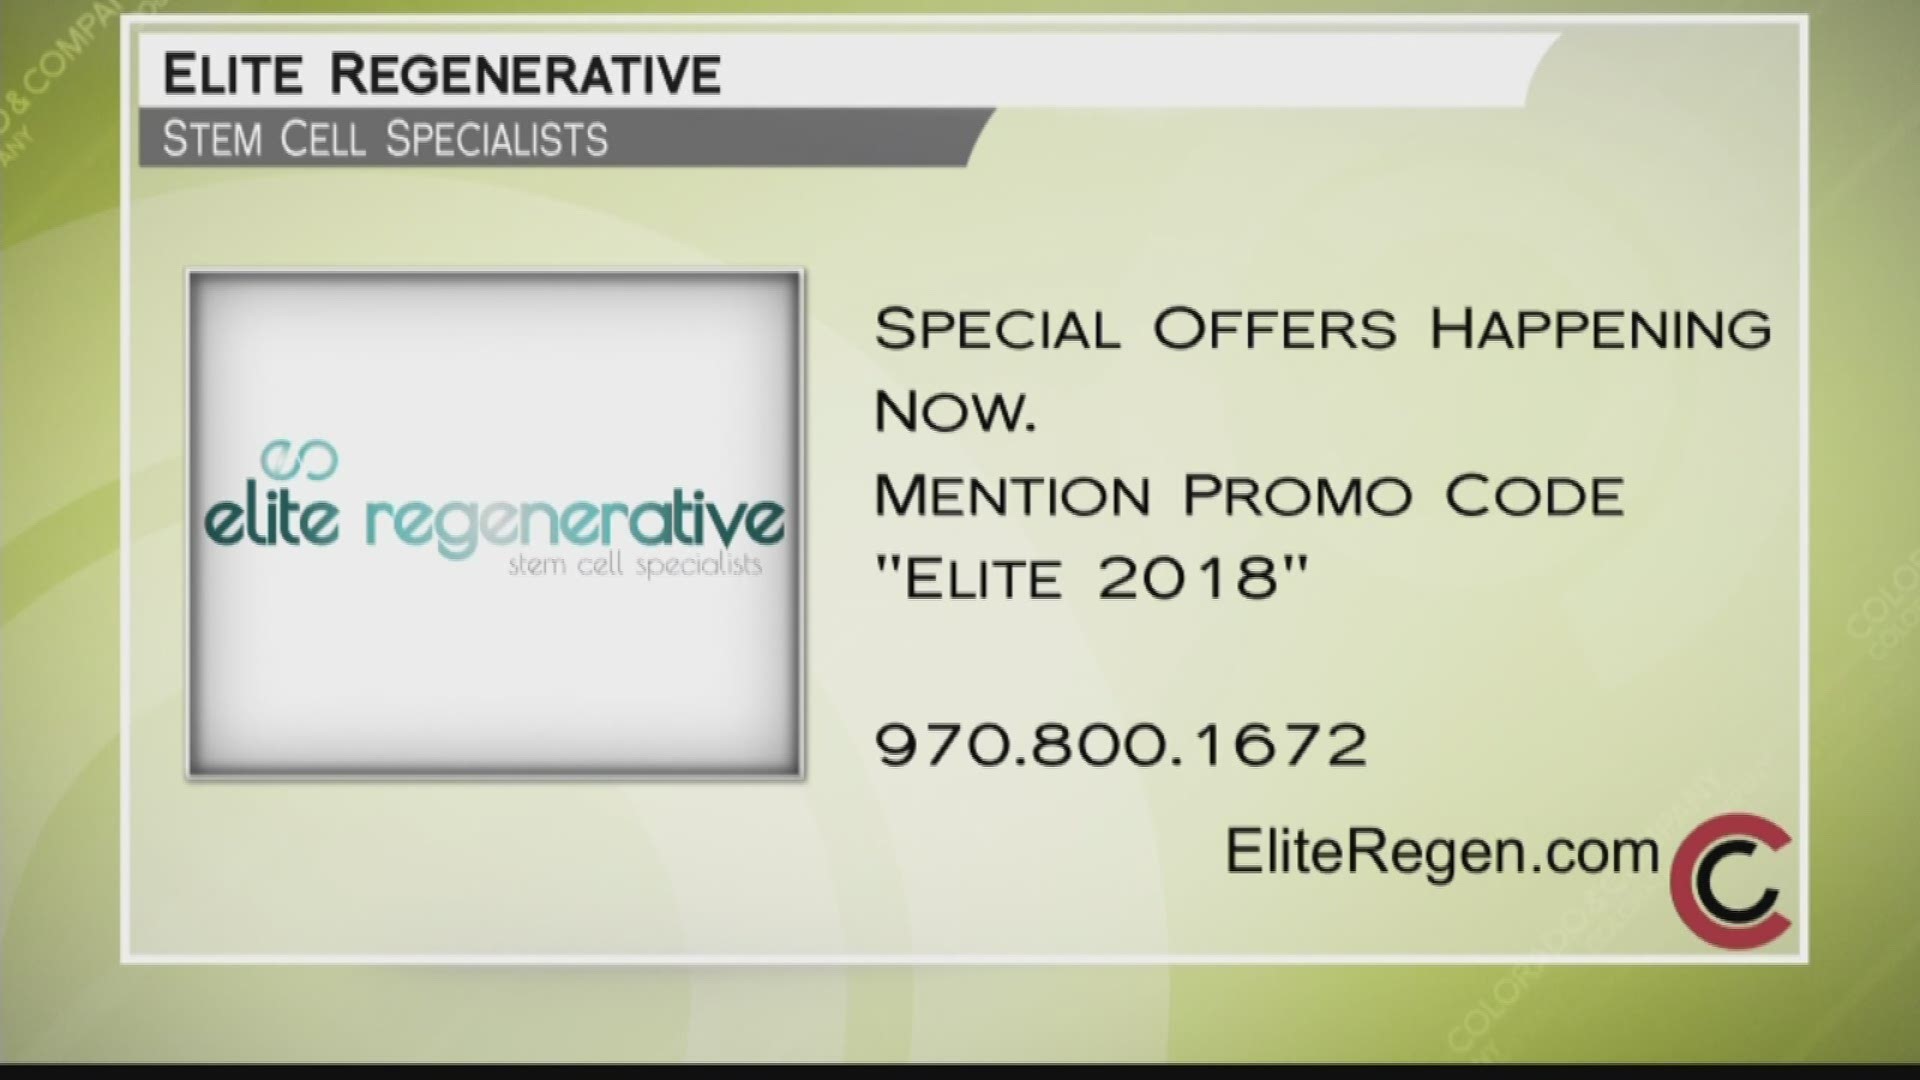 If you're curious about stem cell therapy for you or a loved one, give Elite Regenerative Stem Cell Specialists a call. Mention promo code ELITE 2018 when you call 970.800.1672. Find out more and see if Elite's stem cell treatments can work for you. Visit www.EliteRegen.com for more information. THIS INTERVIEW HAS COMMERCIAL CONTENT. PRODUCTS AND SERVICES FEATURED APPEAR AS PAID ADVERTISING. FIND EXTENDED INTERVIEWS AND BEHIND THE SCENES FEATURES ON FACEBOOK.COM/COLORADOANDCOMPANY. 